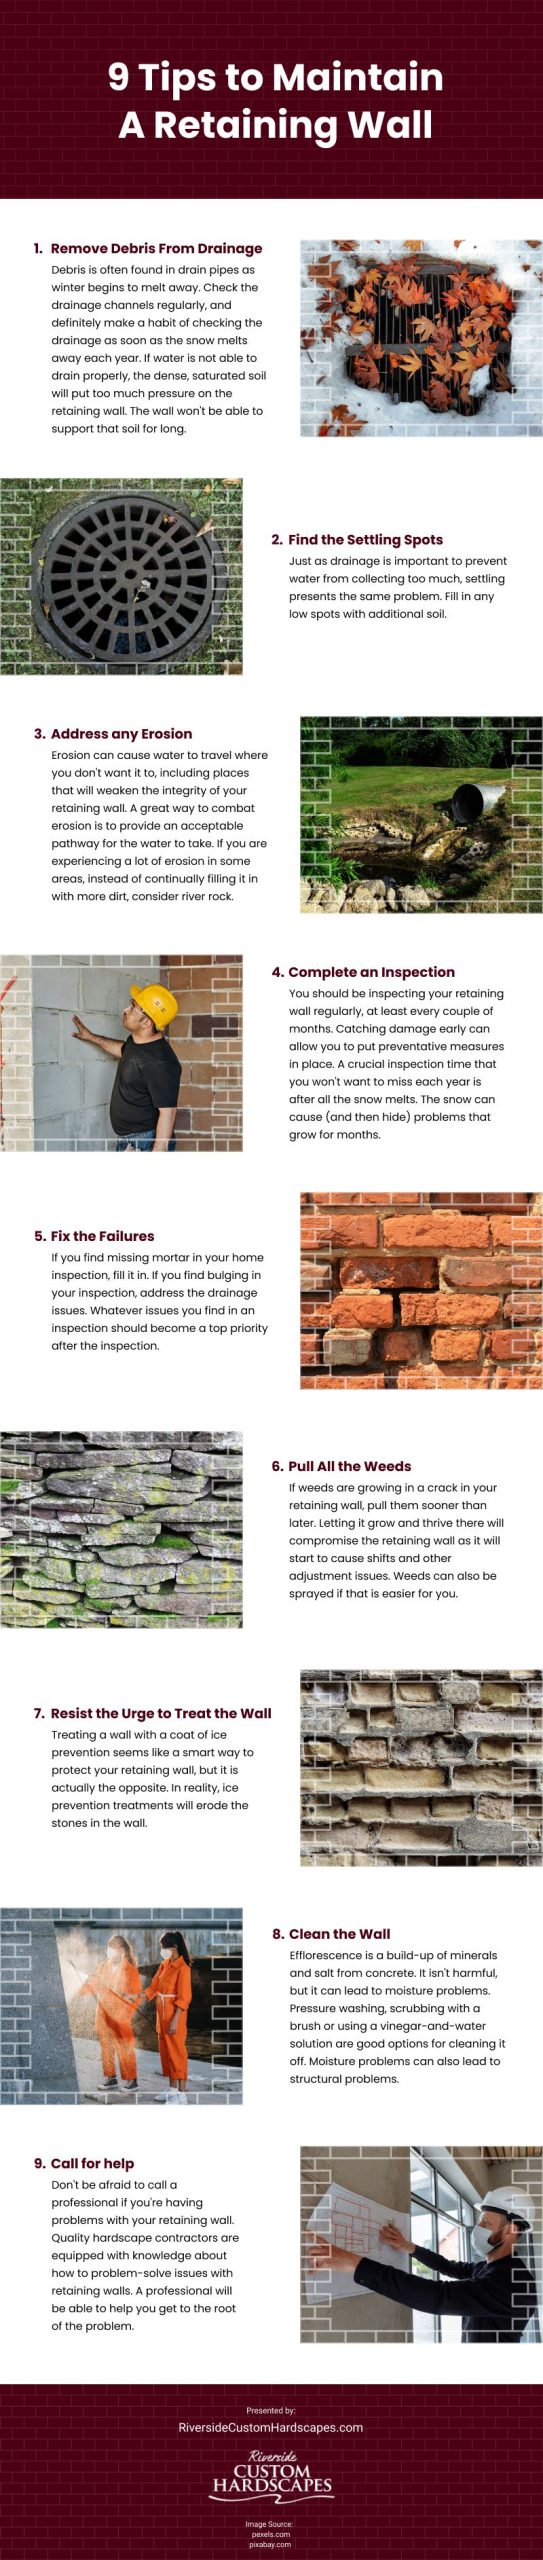 9 Tips to Maintain a Retaining Wall Infographic